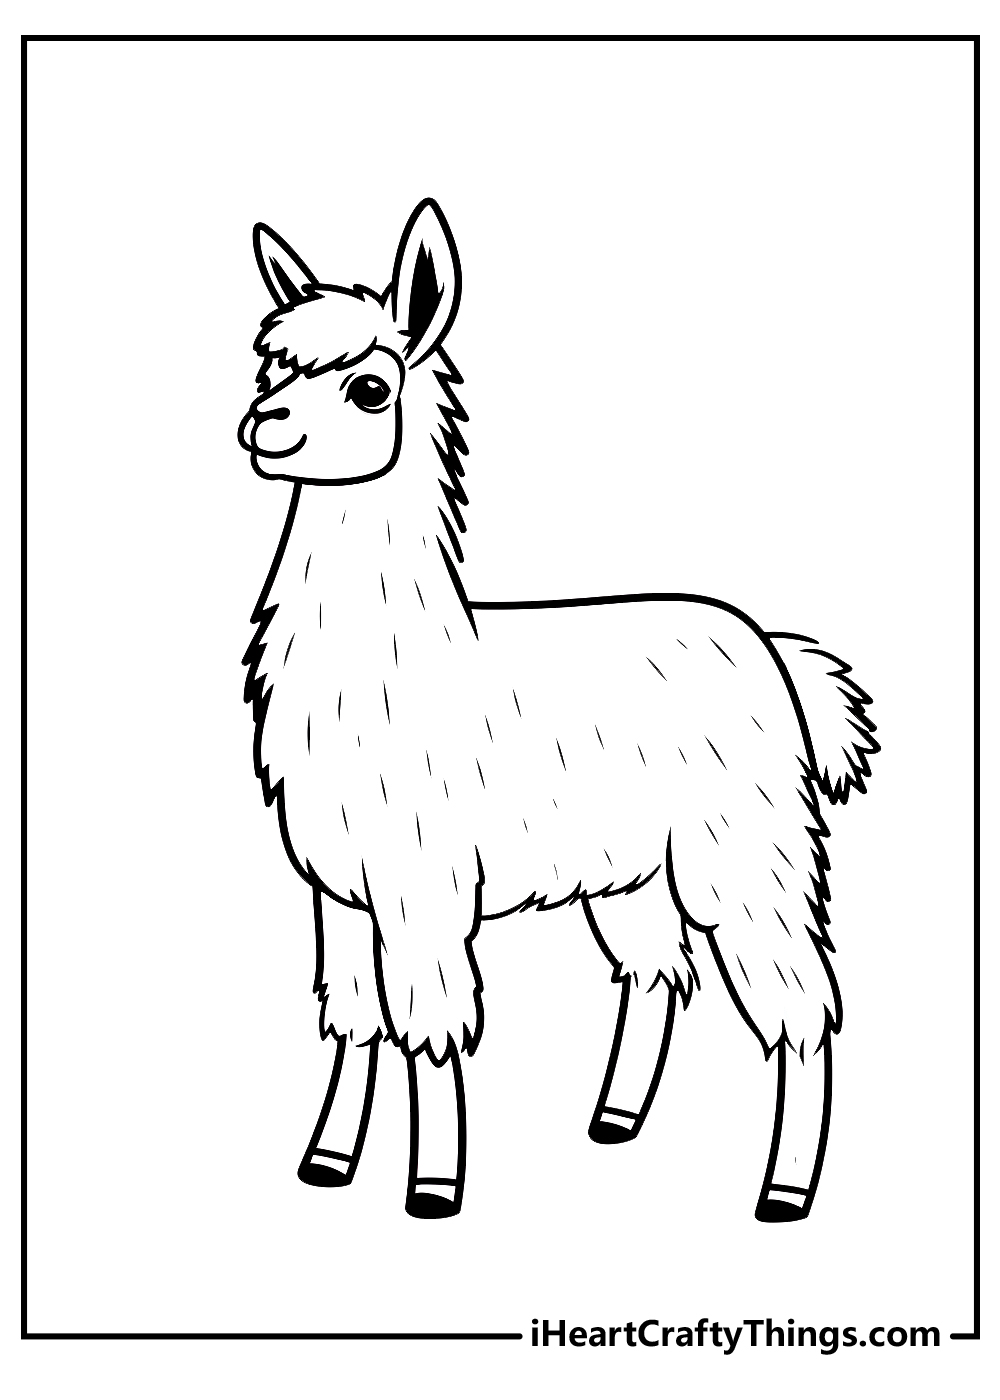 llama coloring pages free download